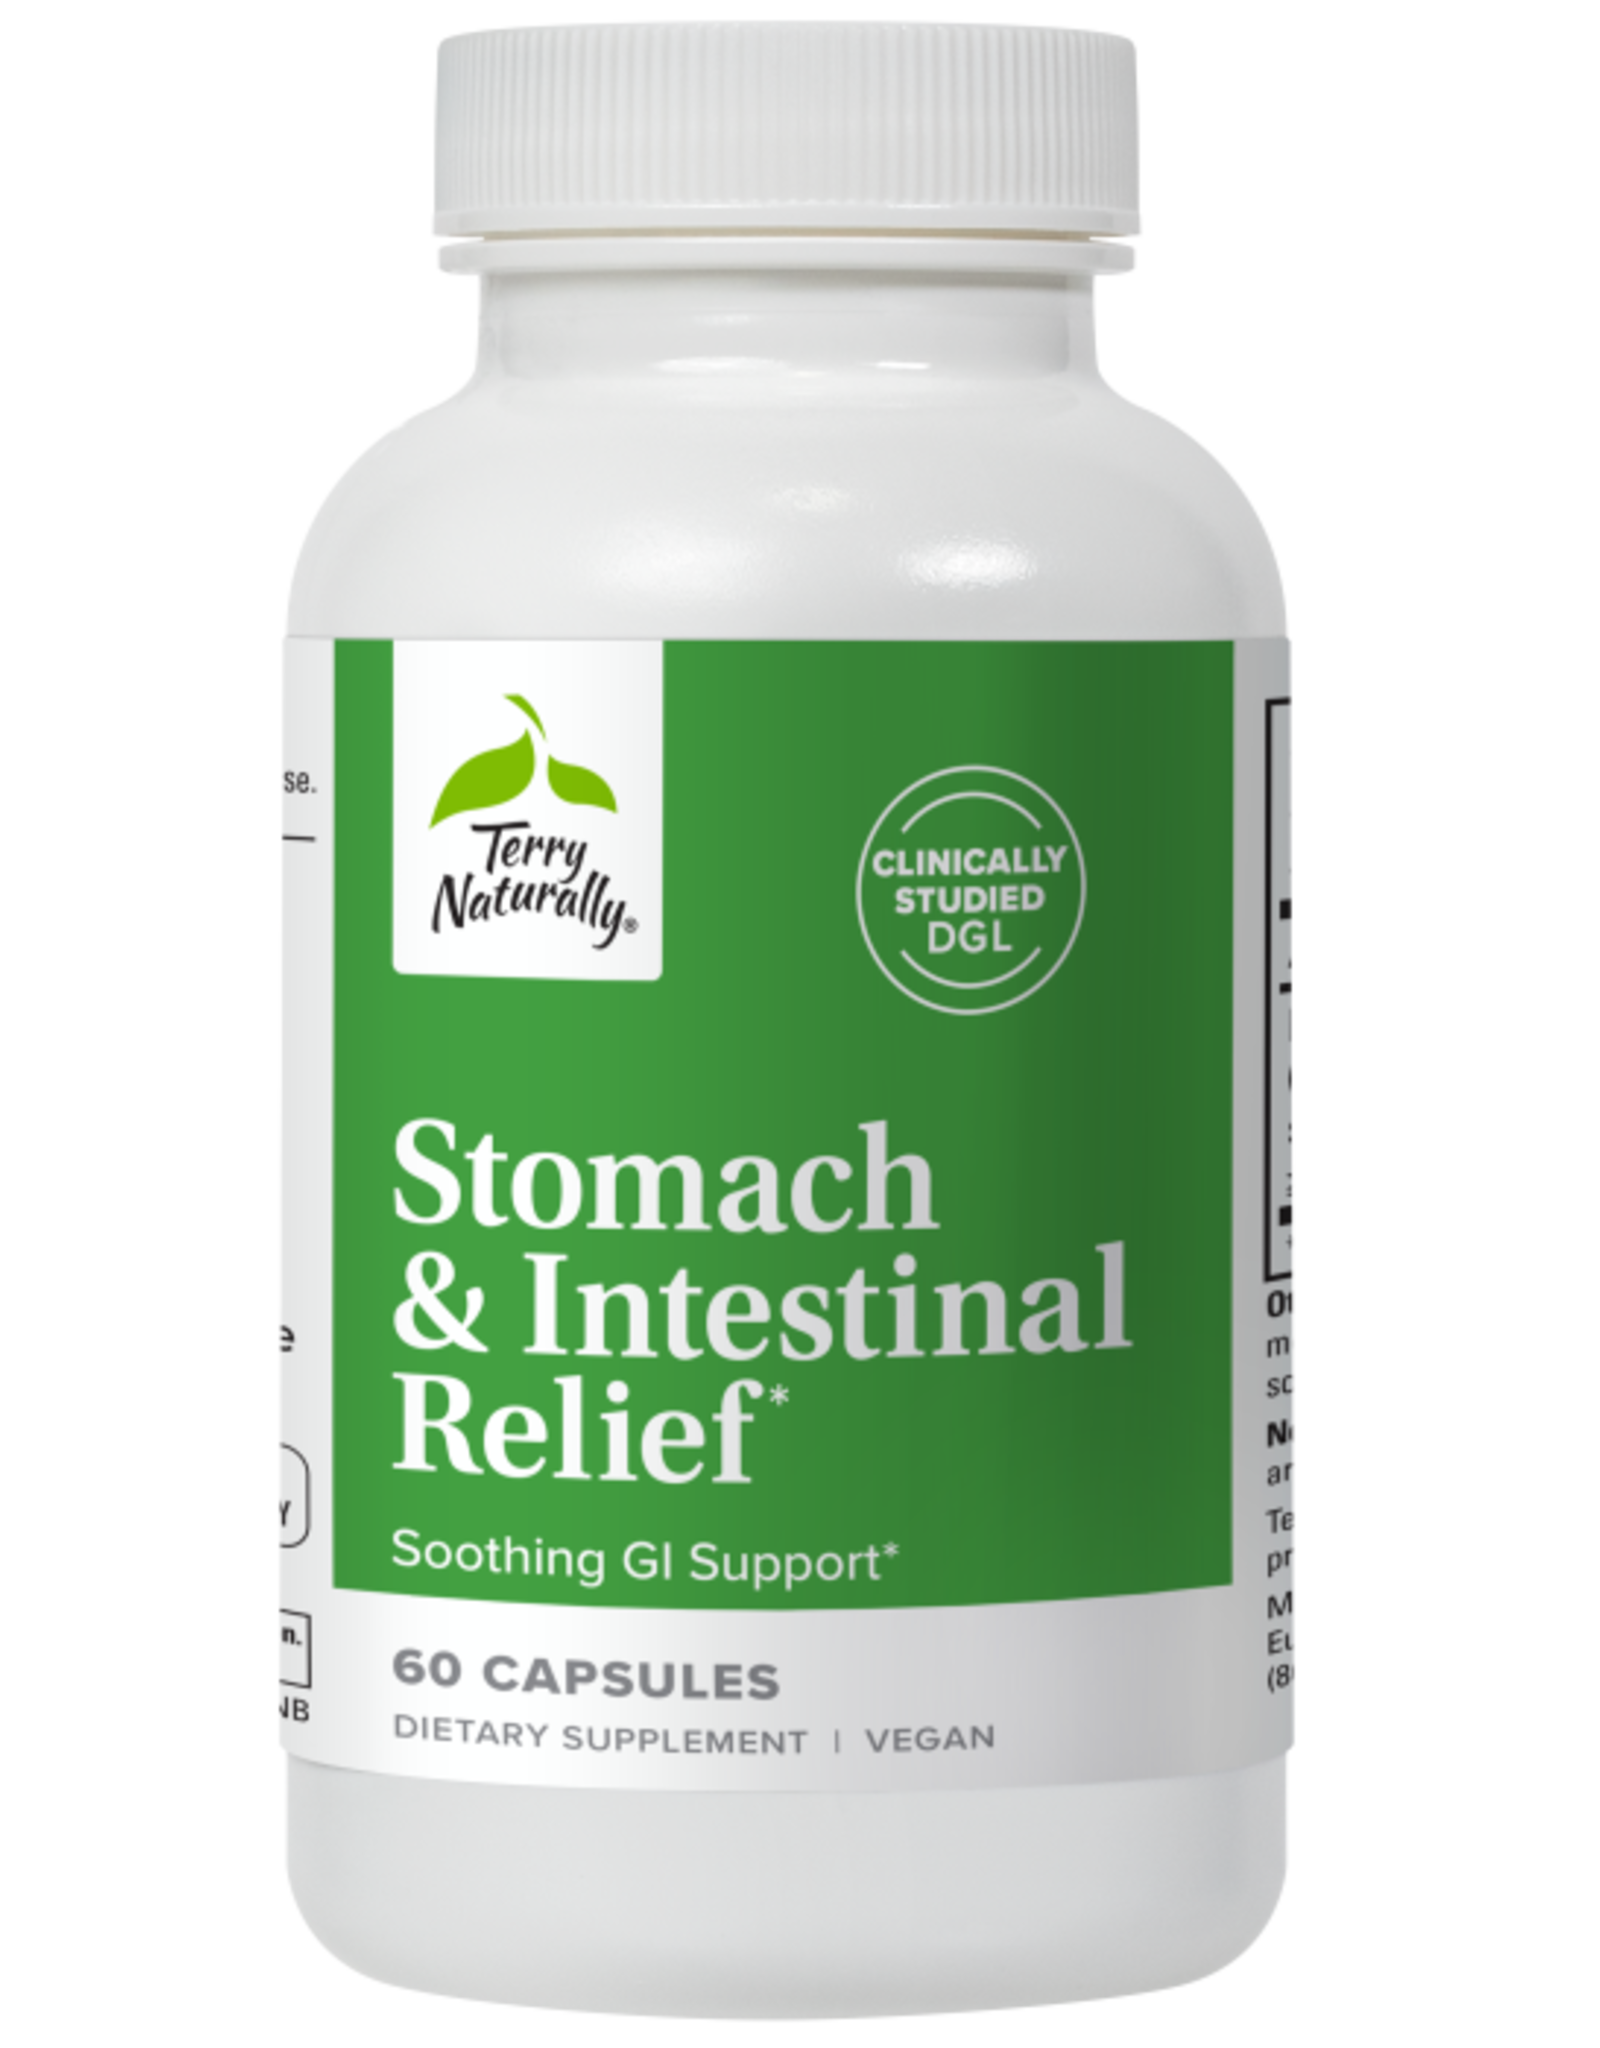 Terry Naturally Stomach & Intestinal Relief - 60 caps